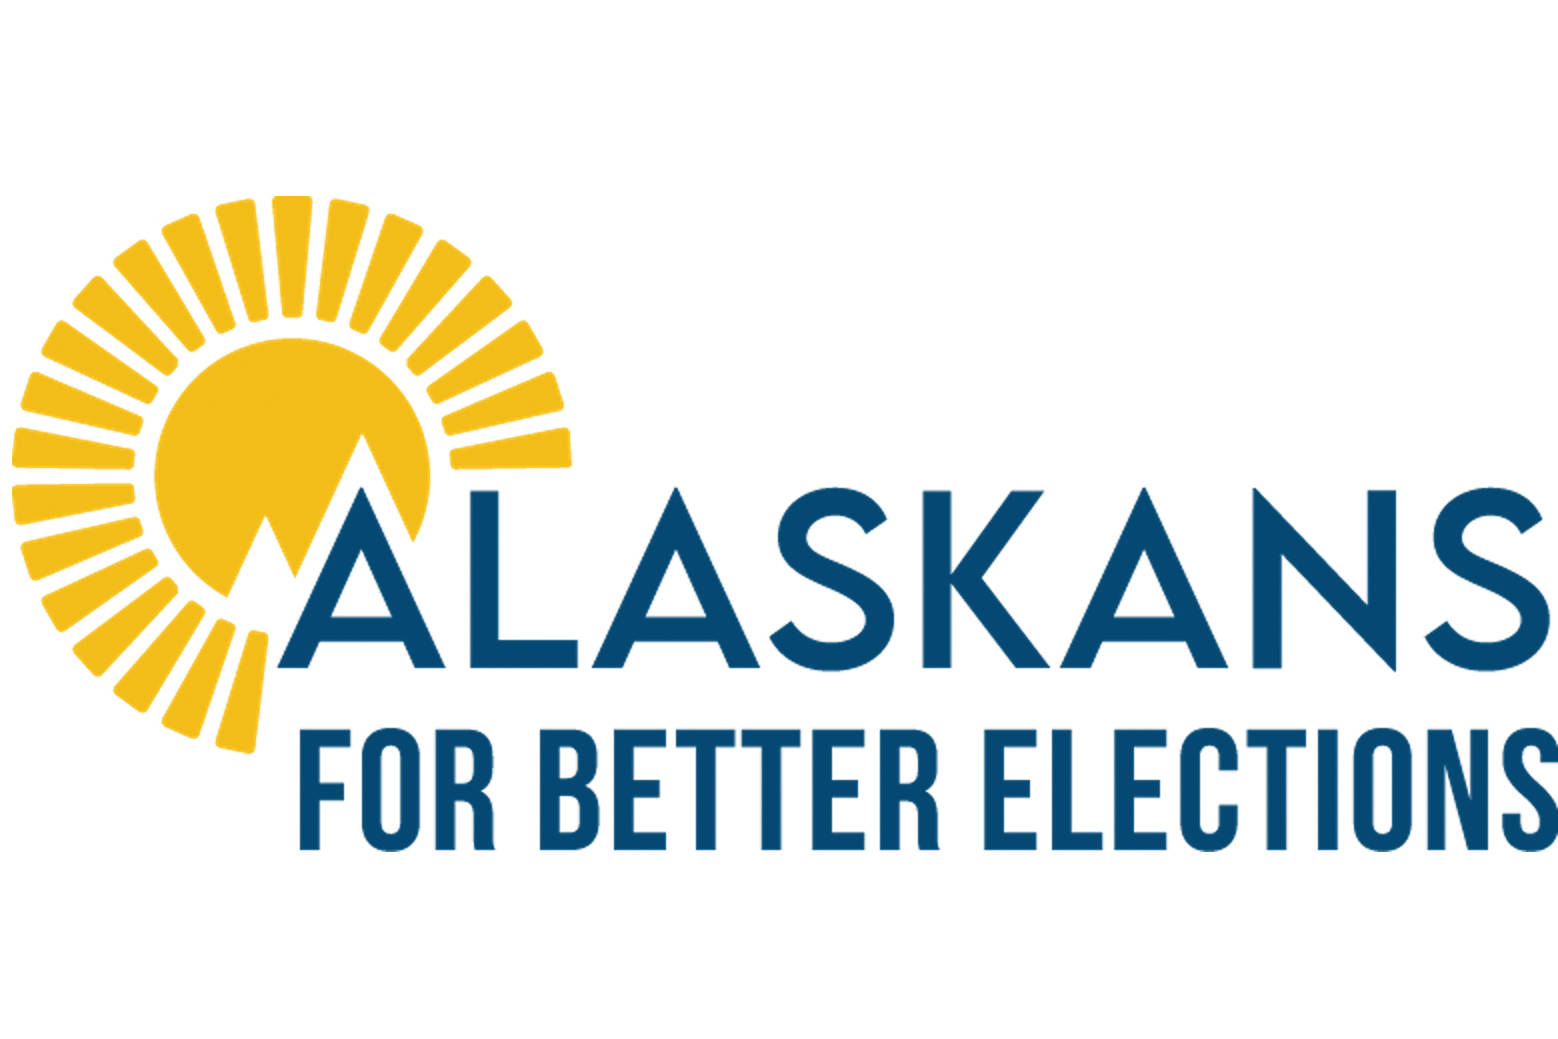 The logo for Alaskans For Better Elections, the group supporting Ballot Measure 2.